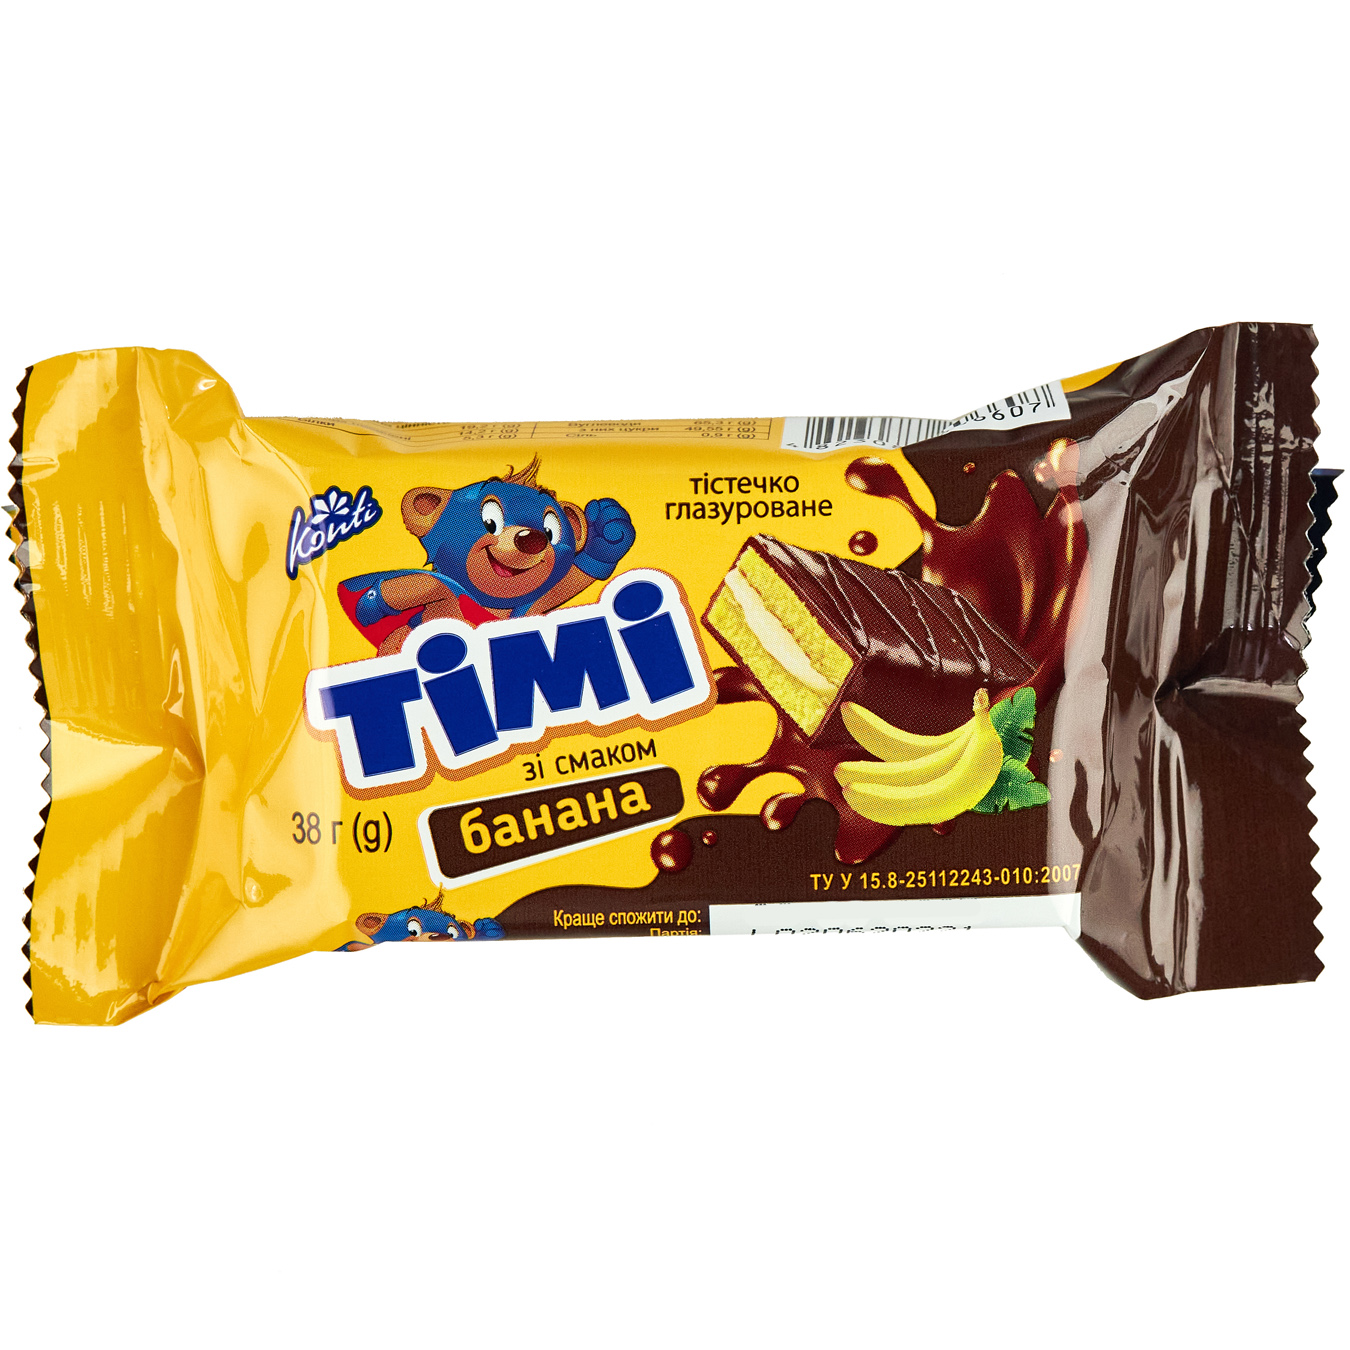 Tima Konta biscuit cake with a taste of banana 38g